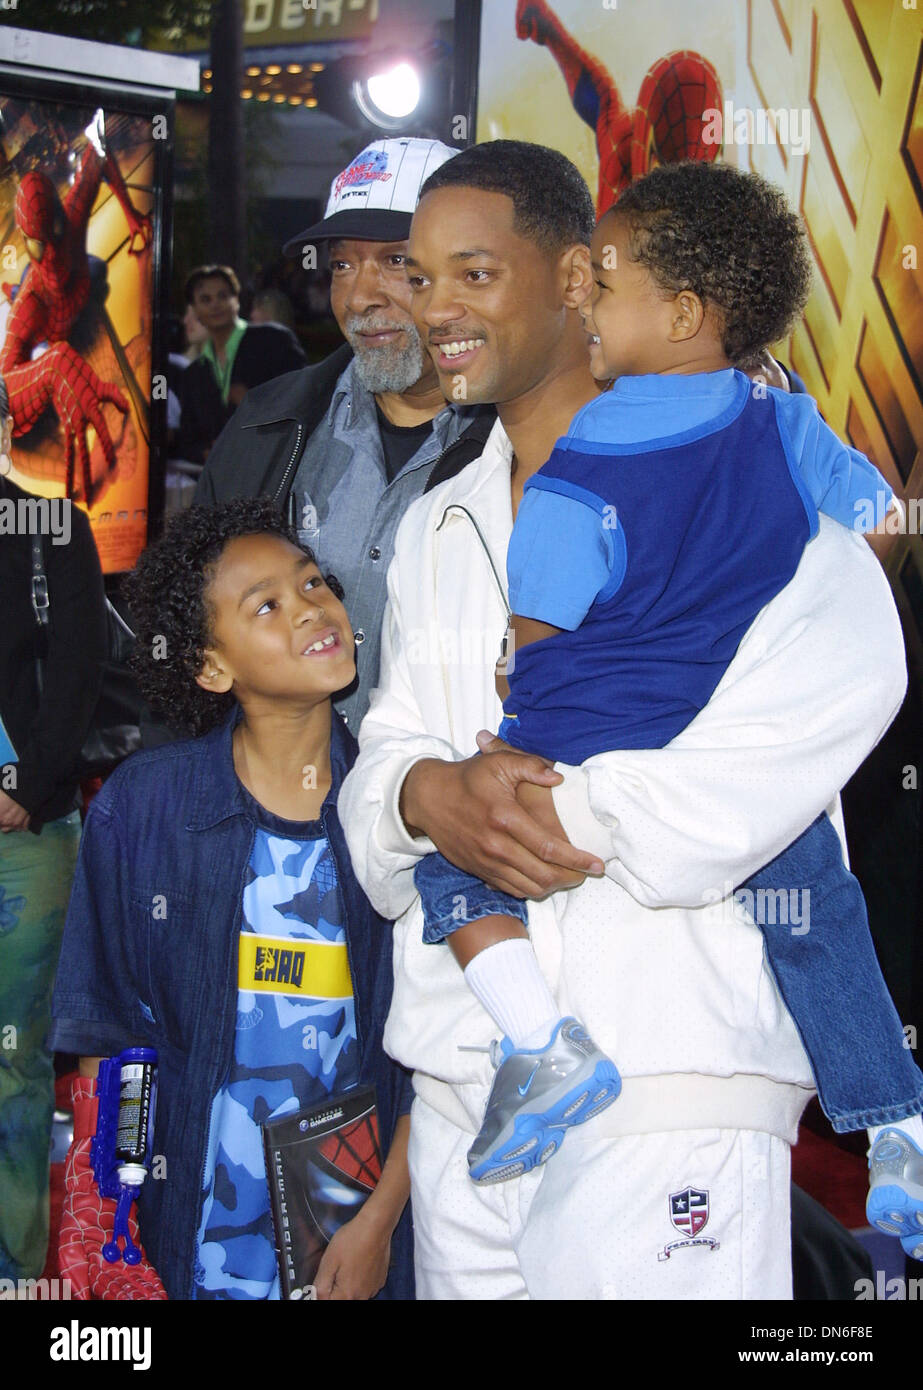 Will Smith Brings His Son Jaden to the 'Suicide Squad' Premiere: Photo  3723760, Jaden Smith, Suicide Squad, Will Smith Photos